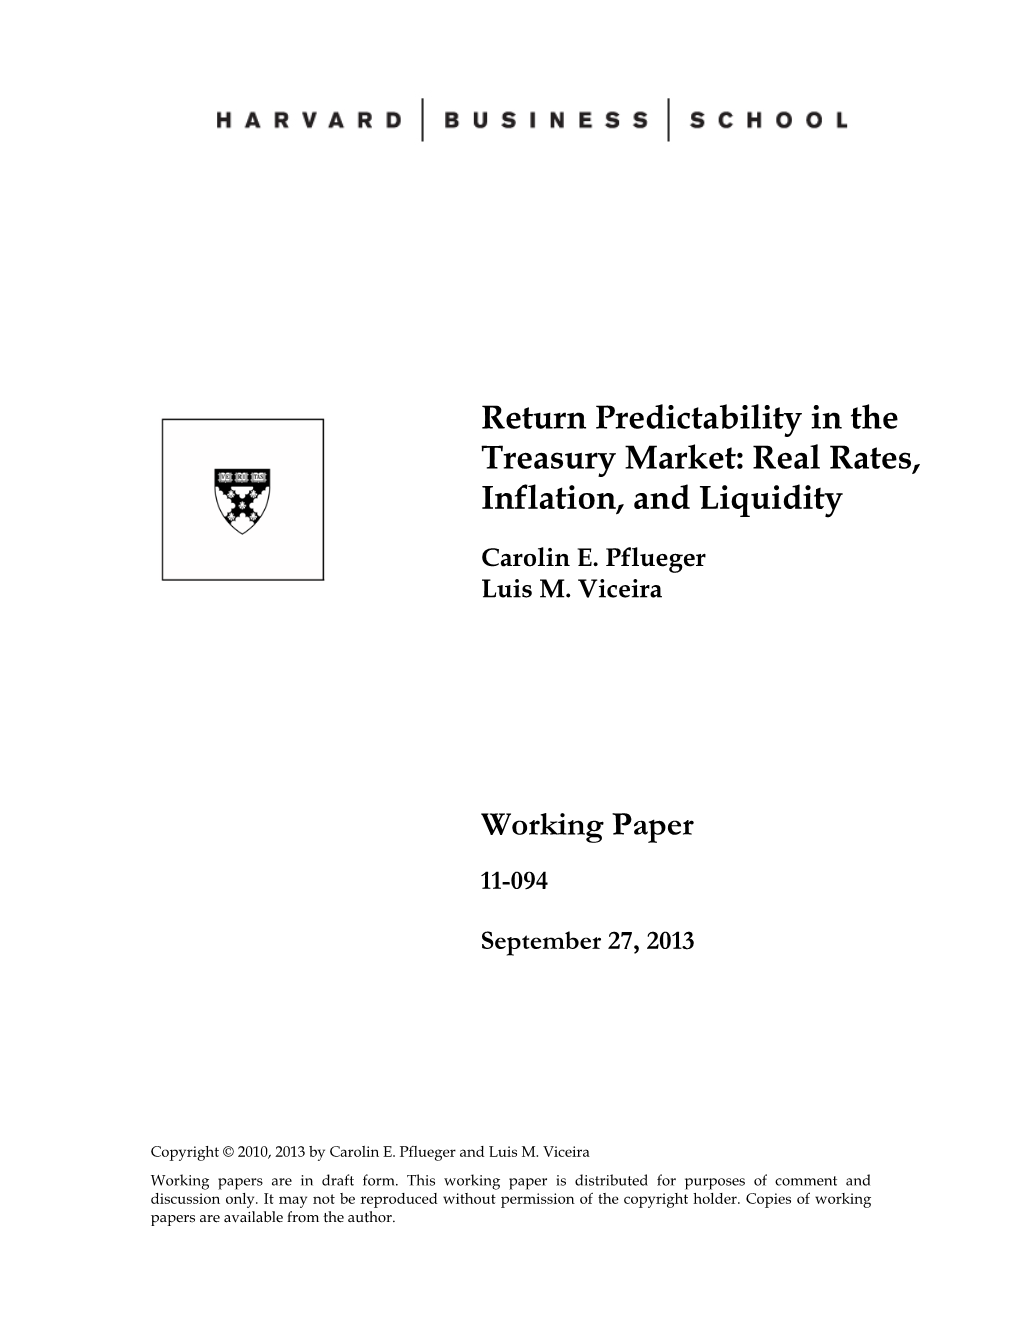 Return Predictability in the Treasury Market: Real Rates, Inflation, and Liquidity